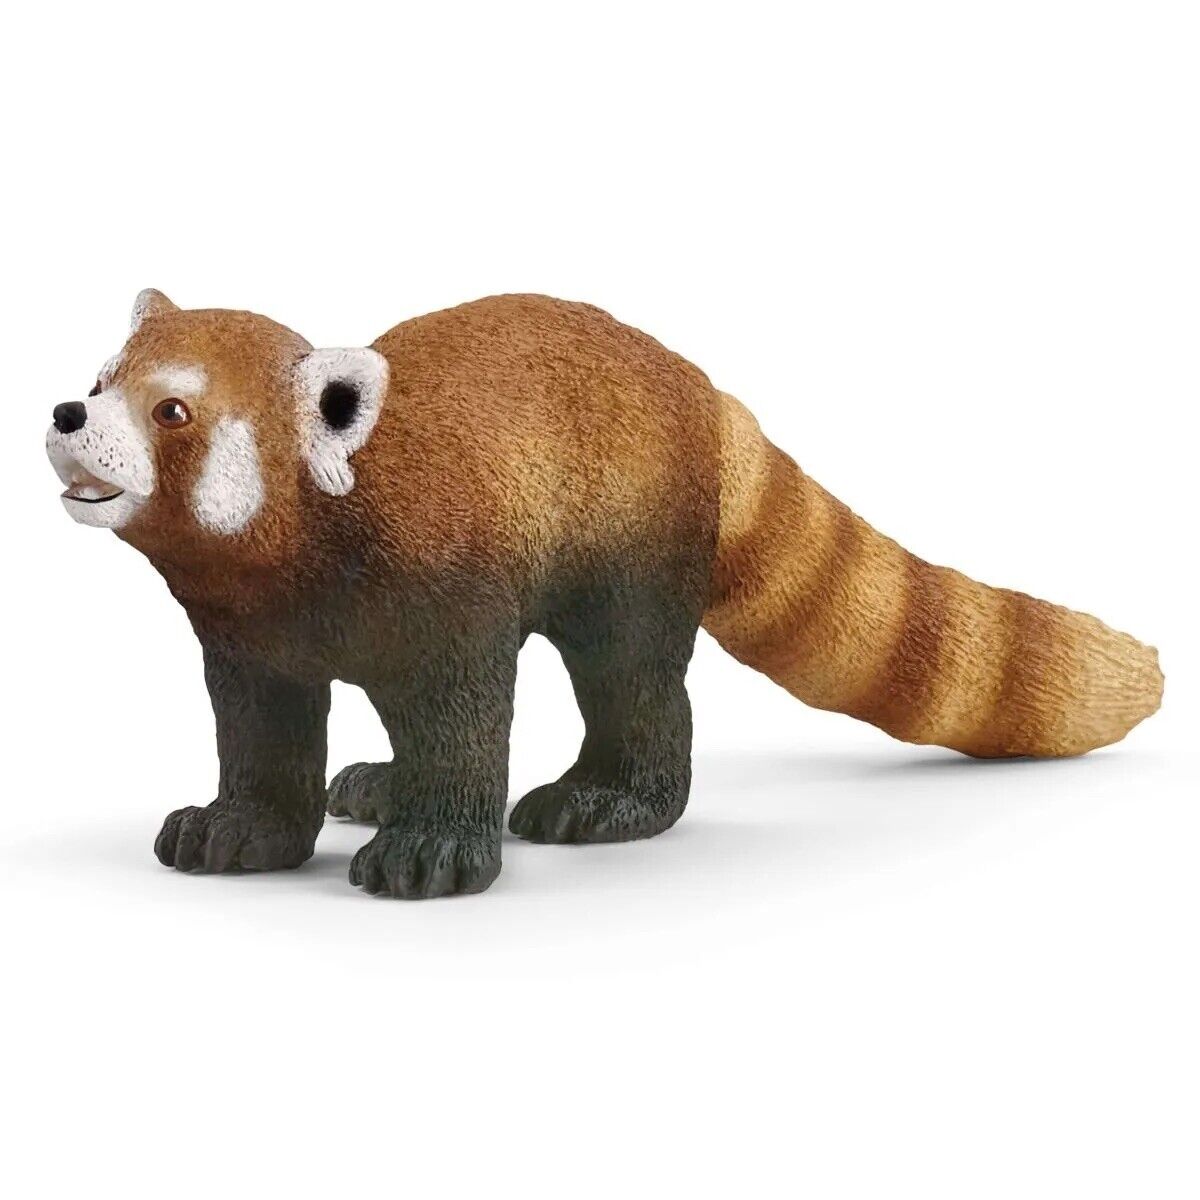 Schleich 14833 Red Panda Plastic Figure collectible BRAND NEW!